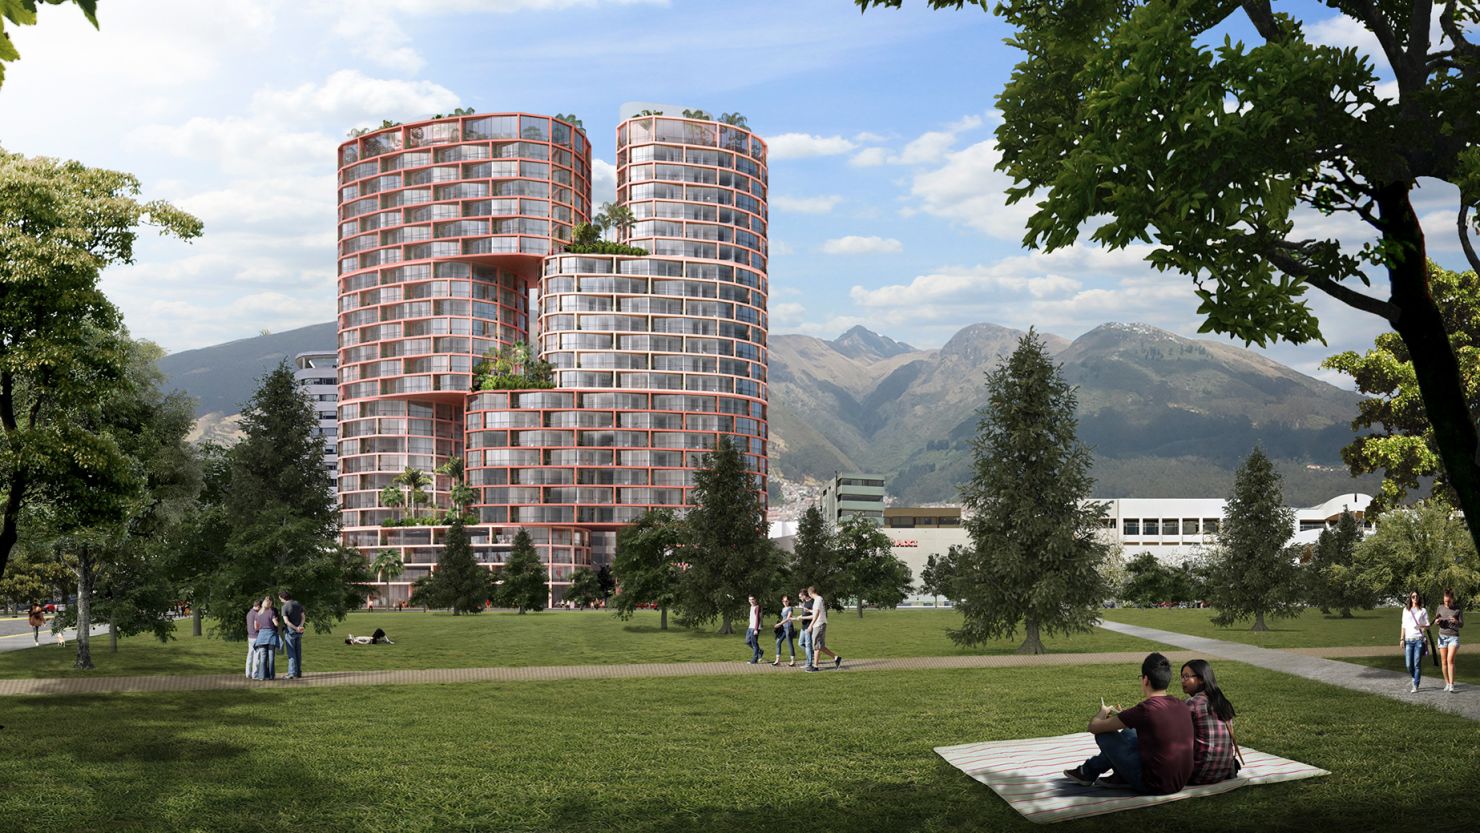 EPIQ, a new residential project opening later this year in Ecuador's capital, Quito.